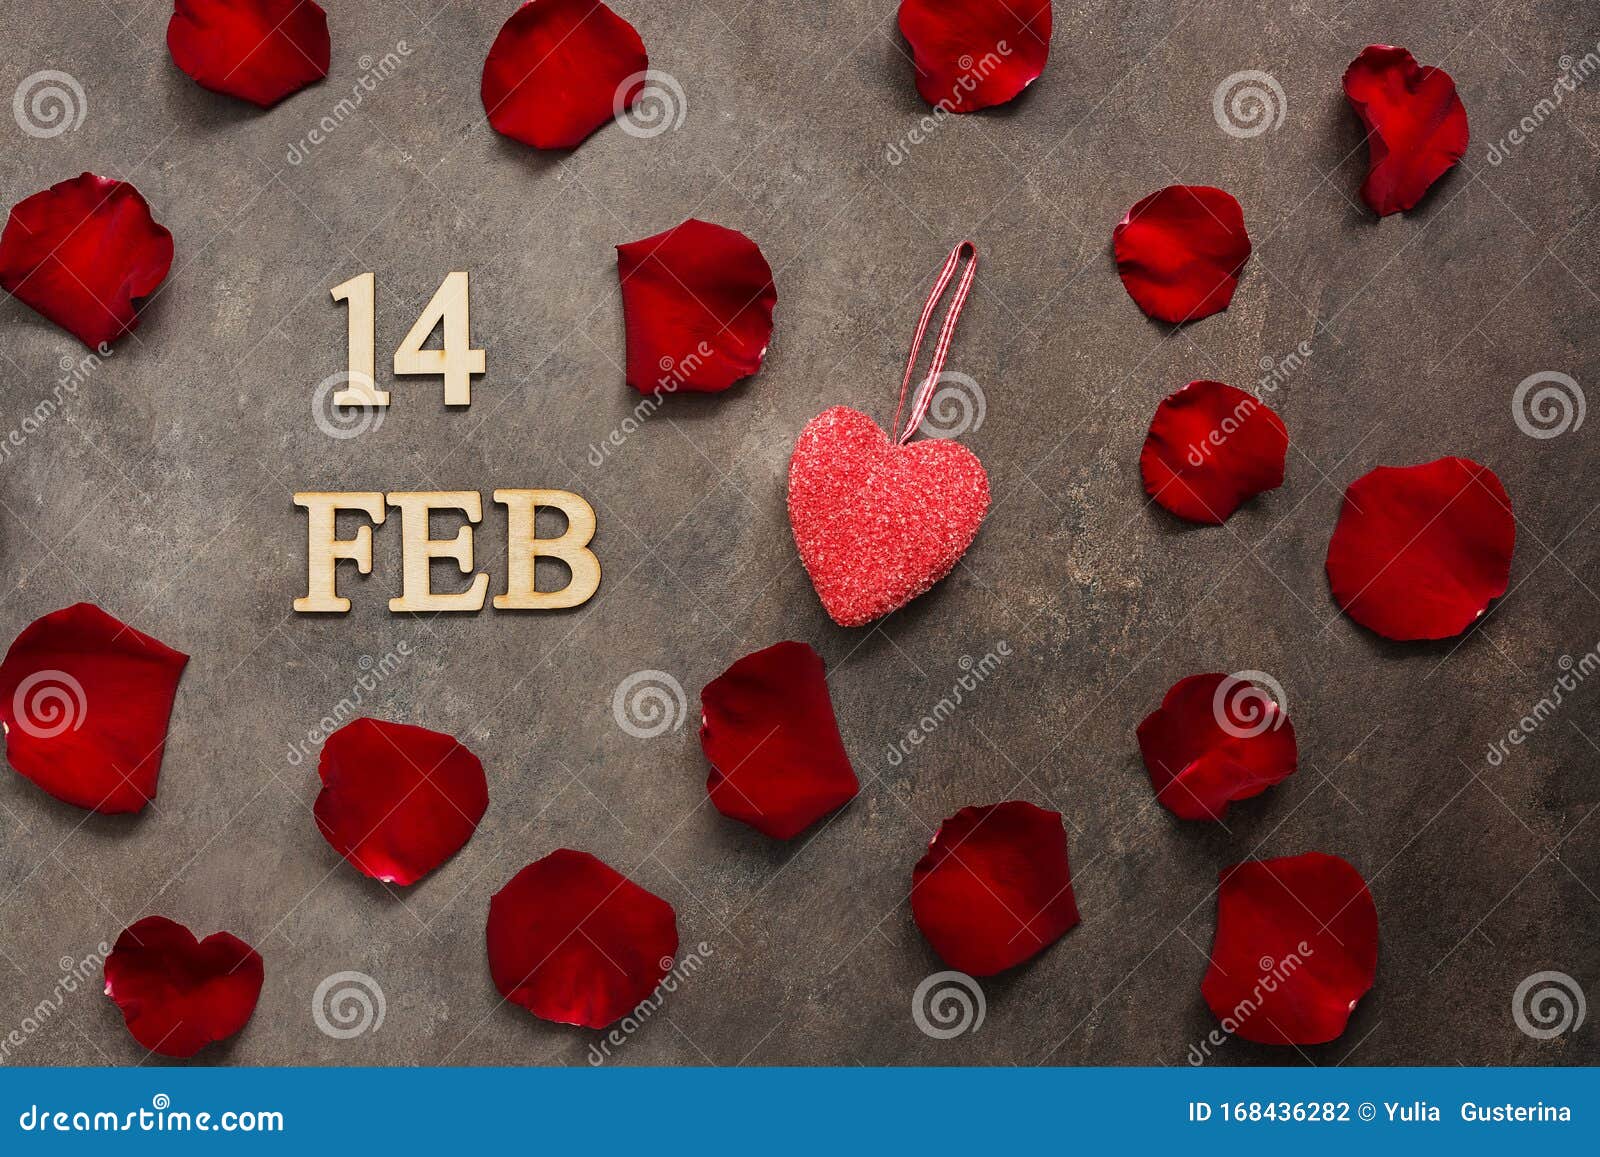 feb 14, valentine`s day. red rose petals and heart on adark brown rustic background. top view, flat lay